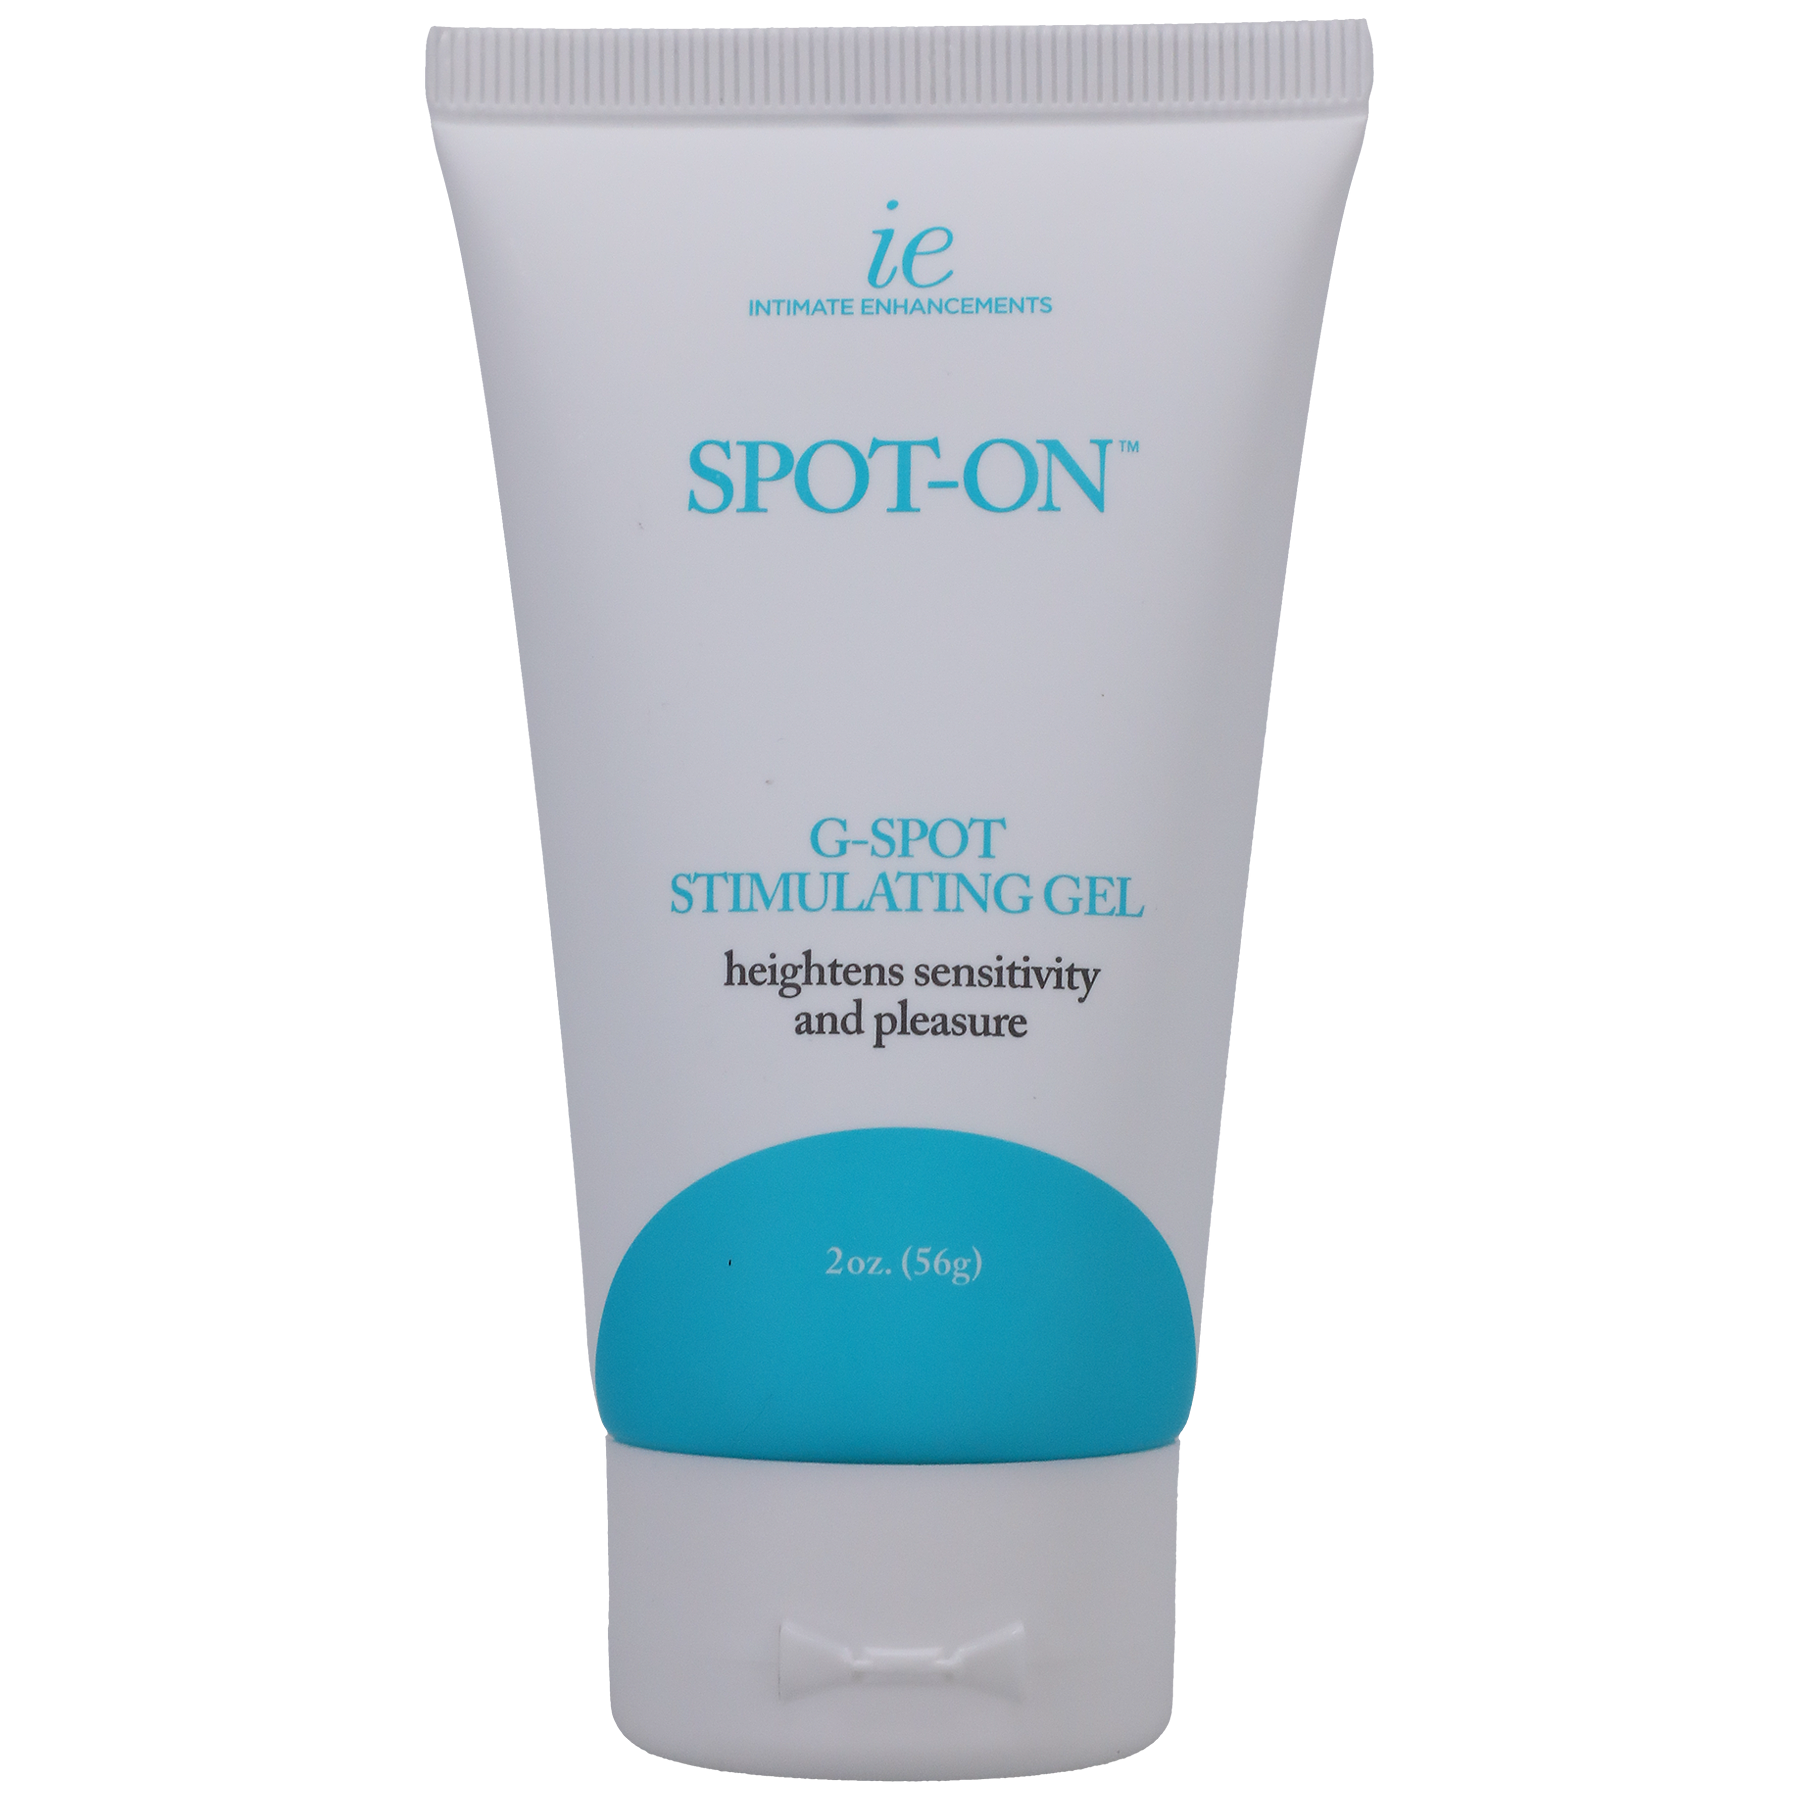 Intimate Enhancements Spot-On - G-Spot Stimulating Gel - Thorn & Feather